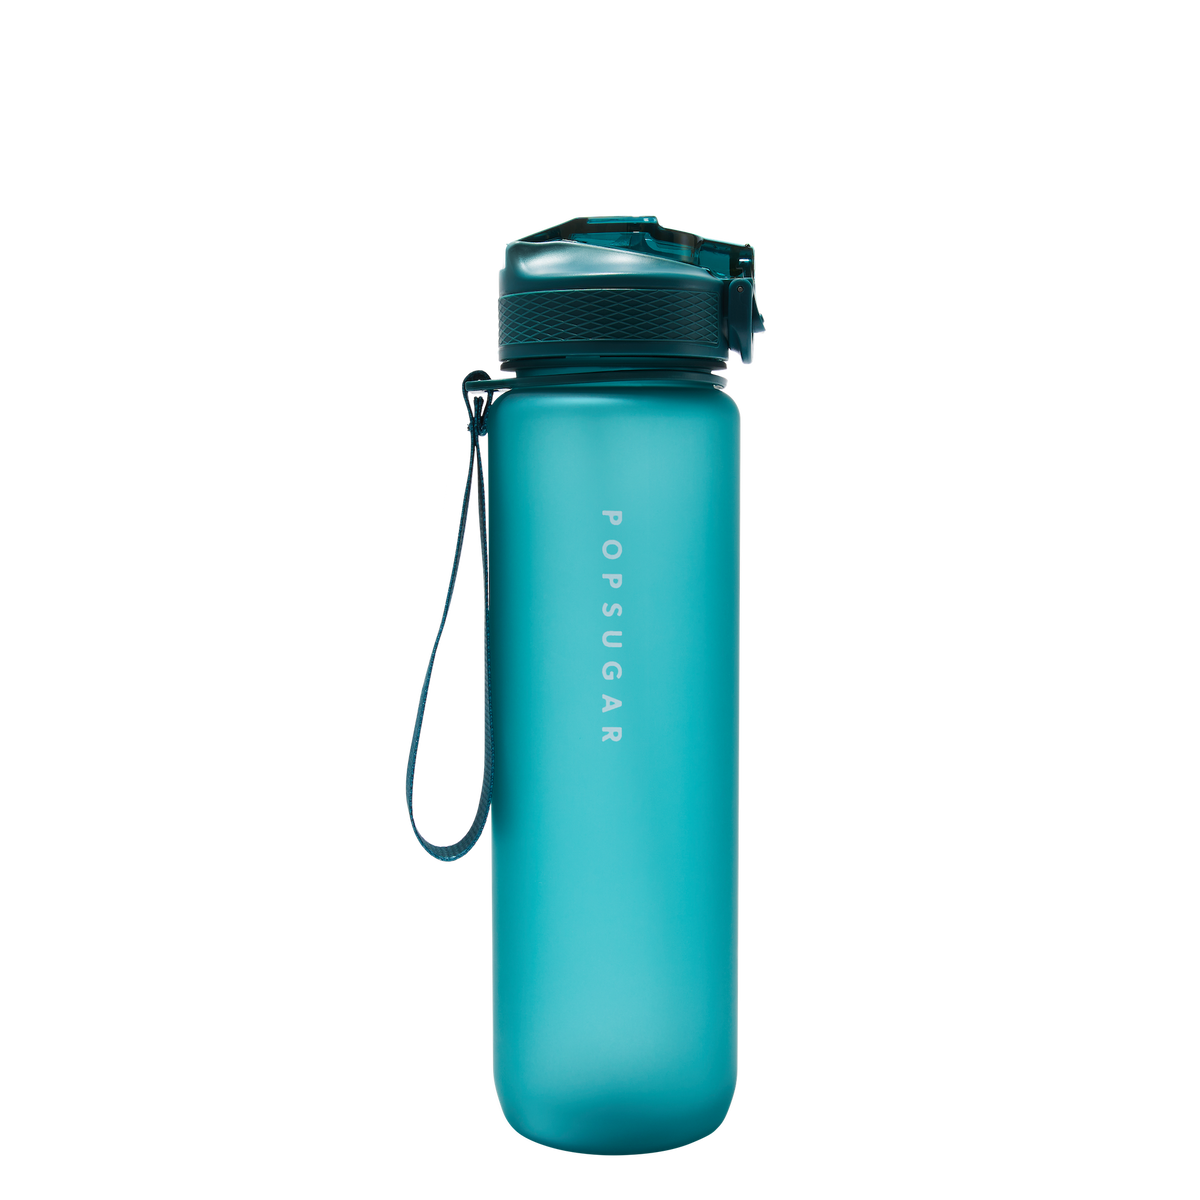 Premium rubber seal thermos bottles For Heat And Cold Preservation 